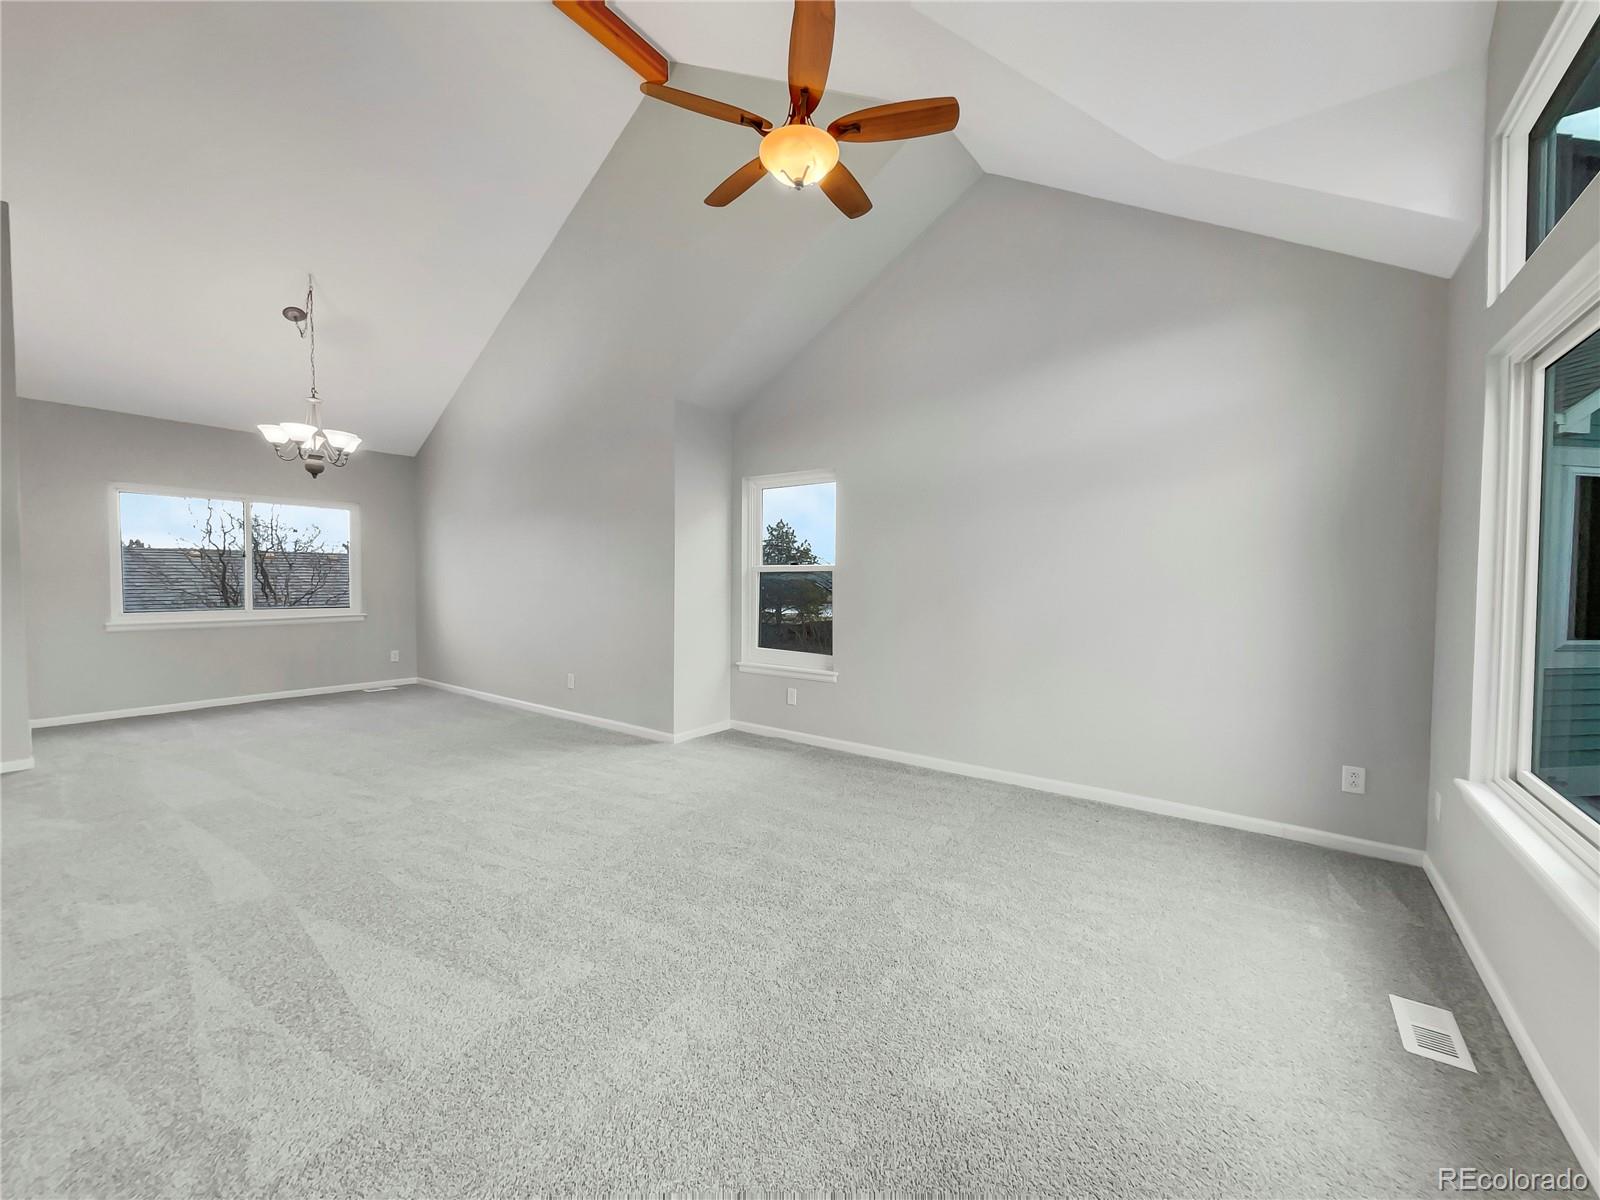 Report Image for 3511 W 112th Circle,Westminster, Colorado